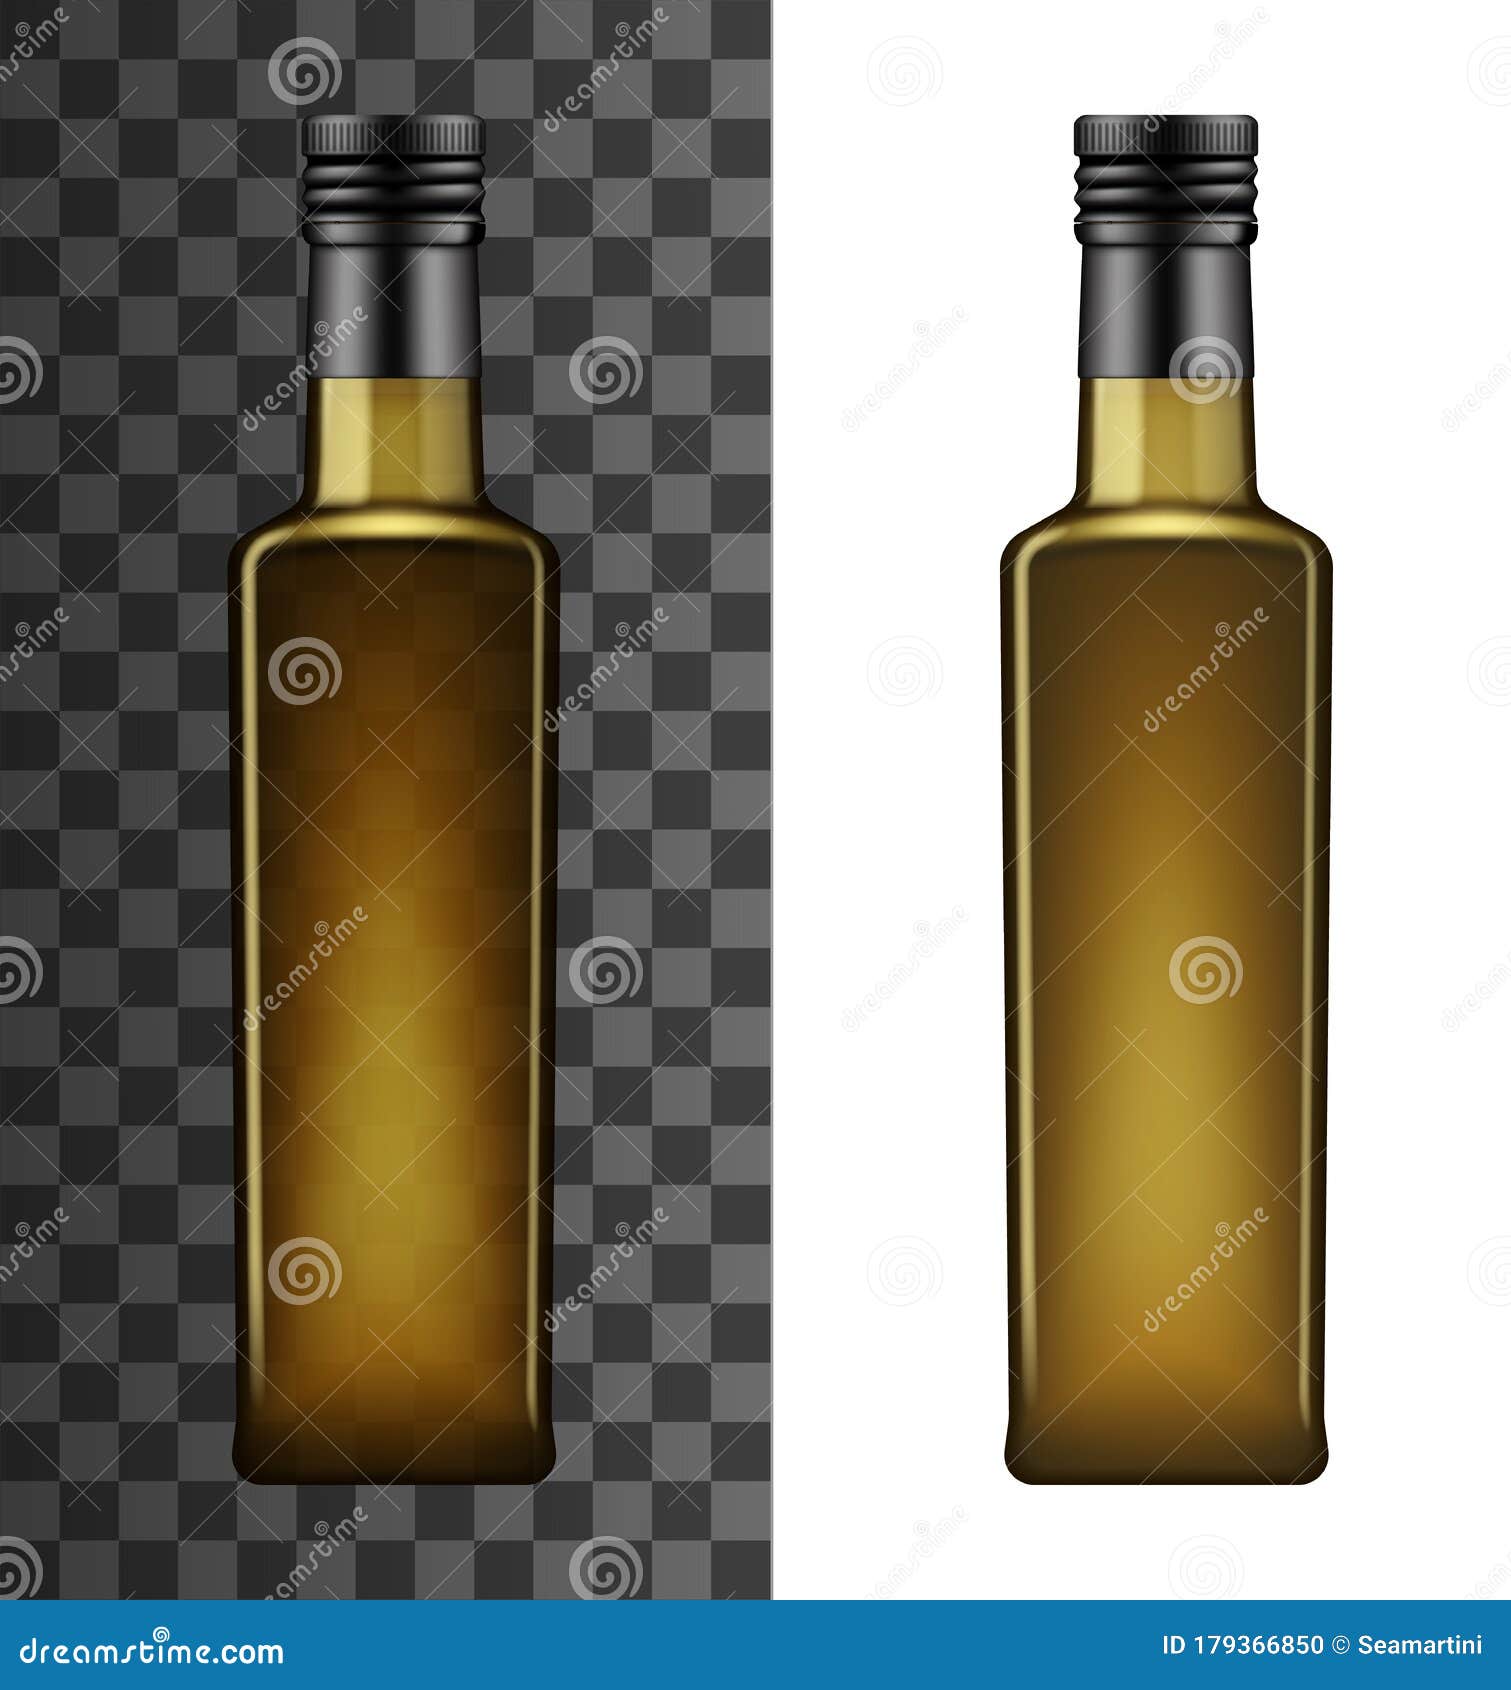 Download Cooking Oil Glass Square Bottle Mockup Stock Vector ...